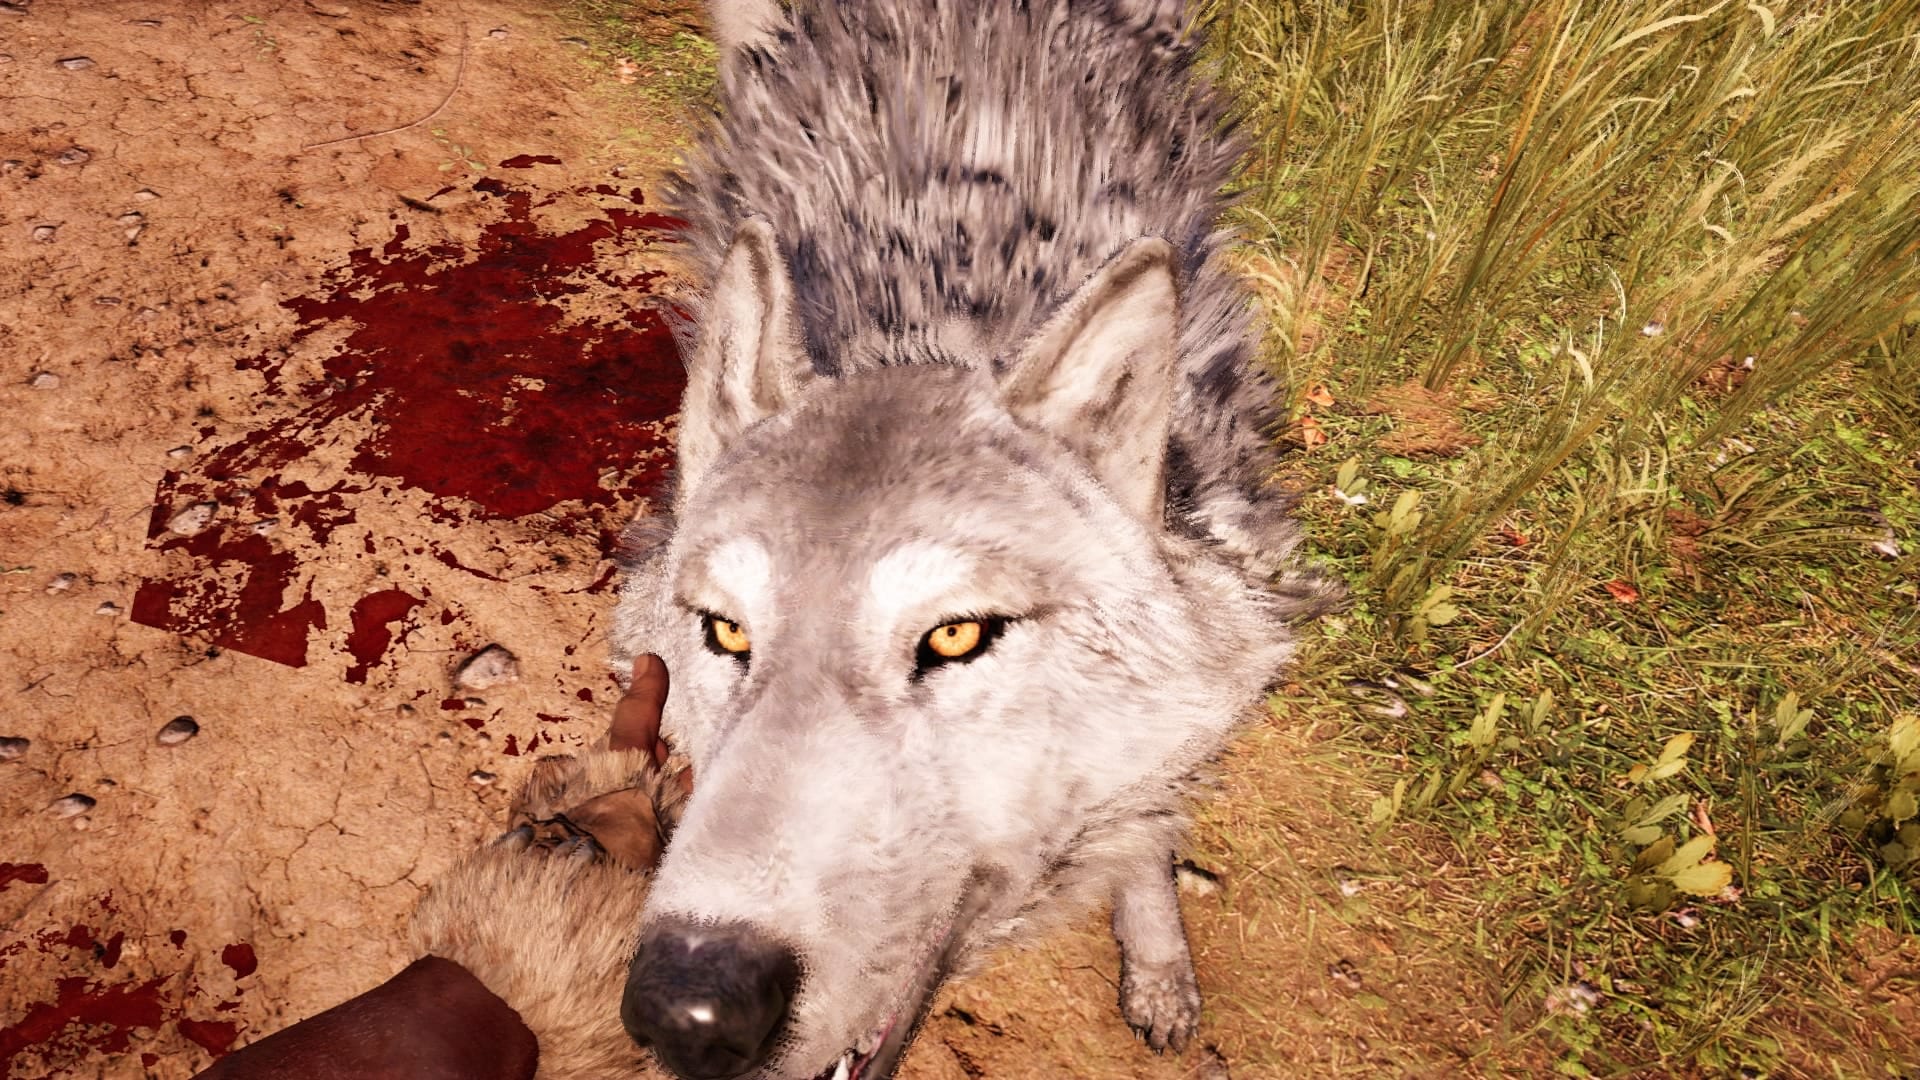 Dave the Wolf is a good boy. He likes cuddles and strokes. Oh, and man flesh.